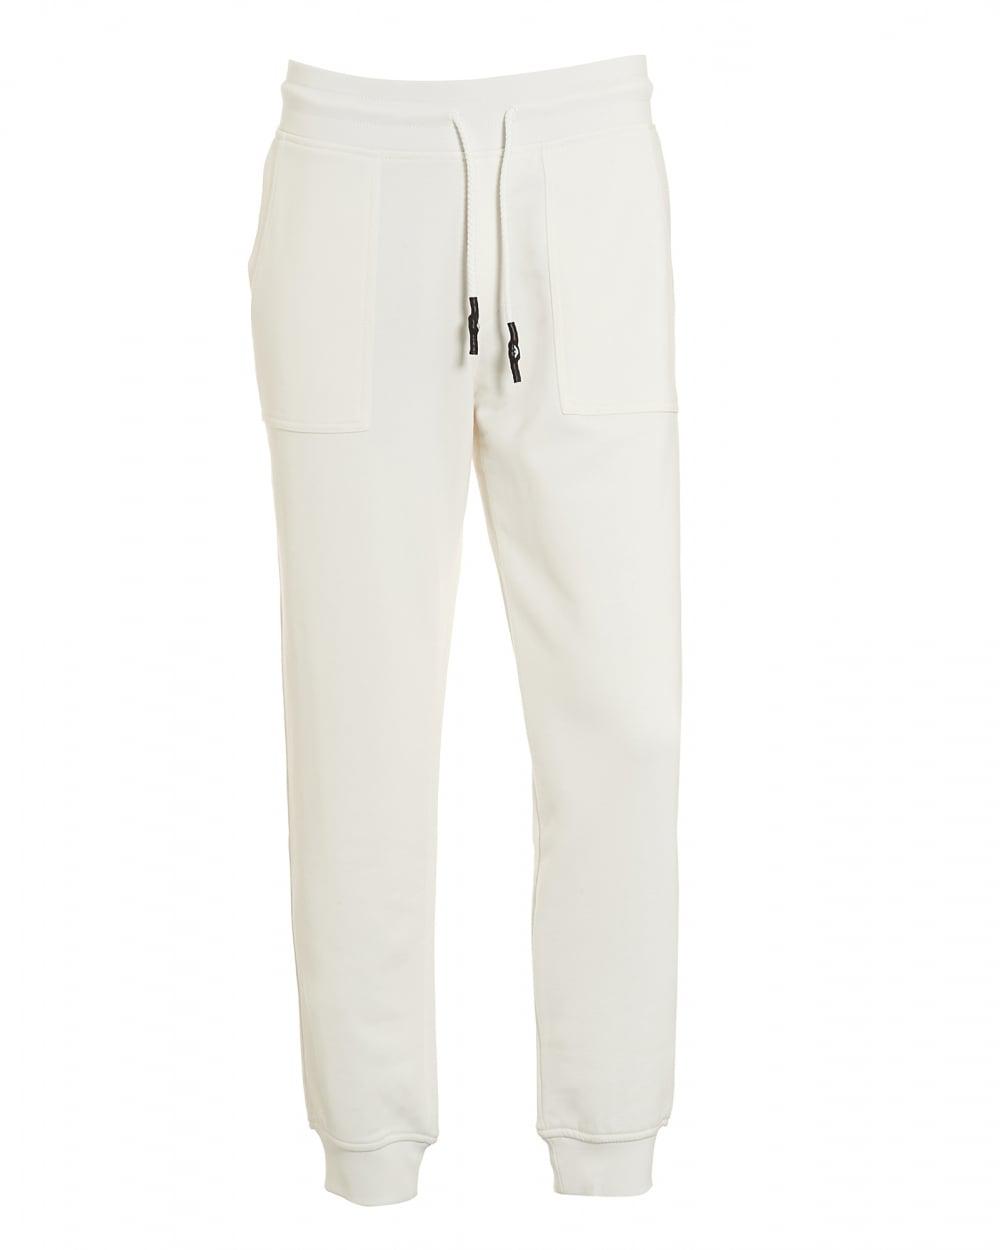 Lyst - Armani Jeans Embroidered Trackpants, Cuffed White Sweatpants in ...